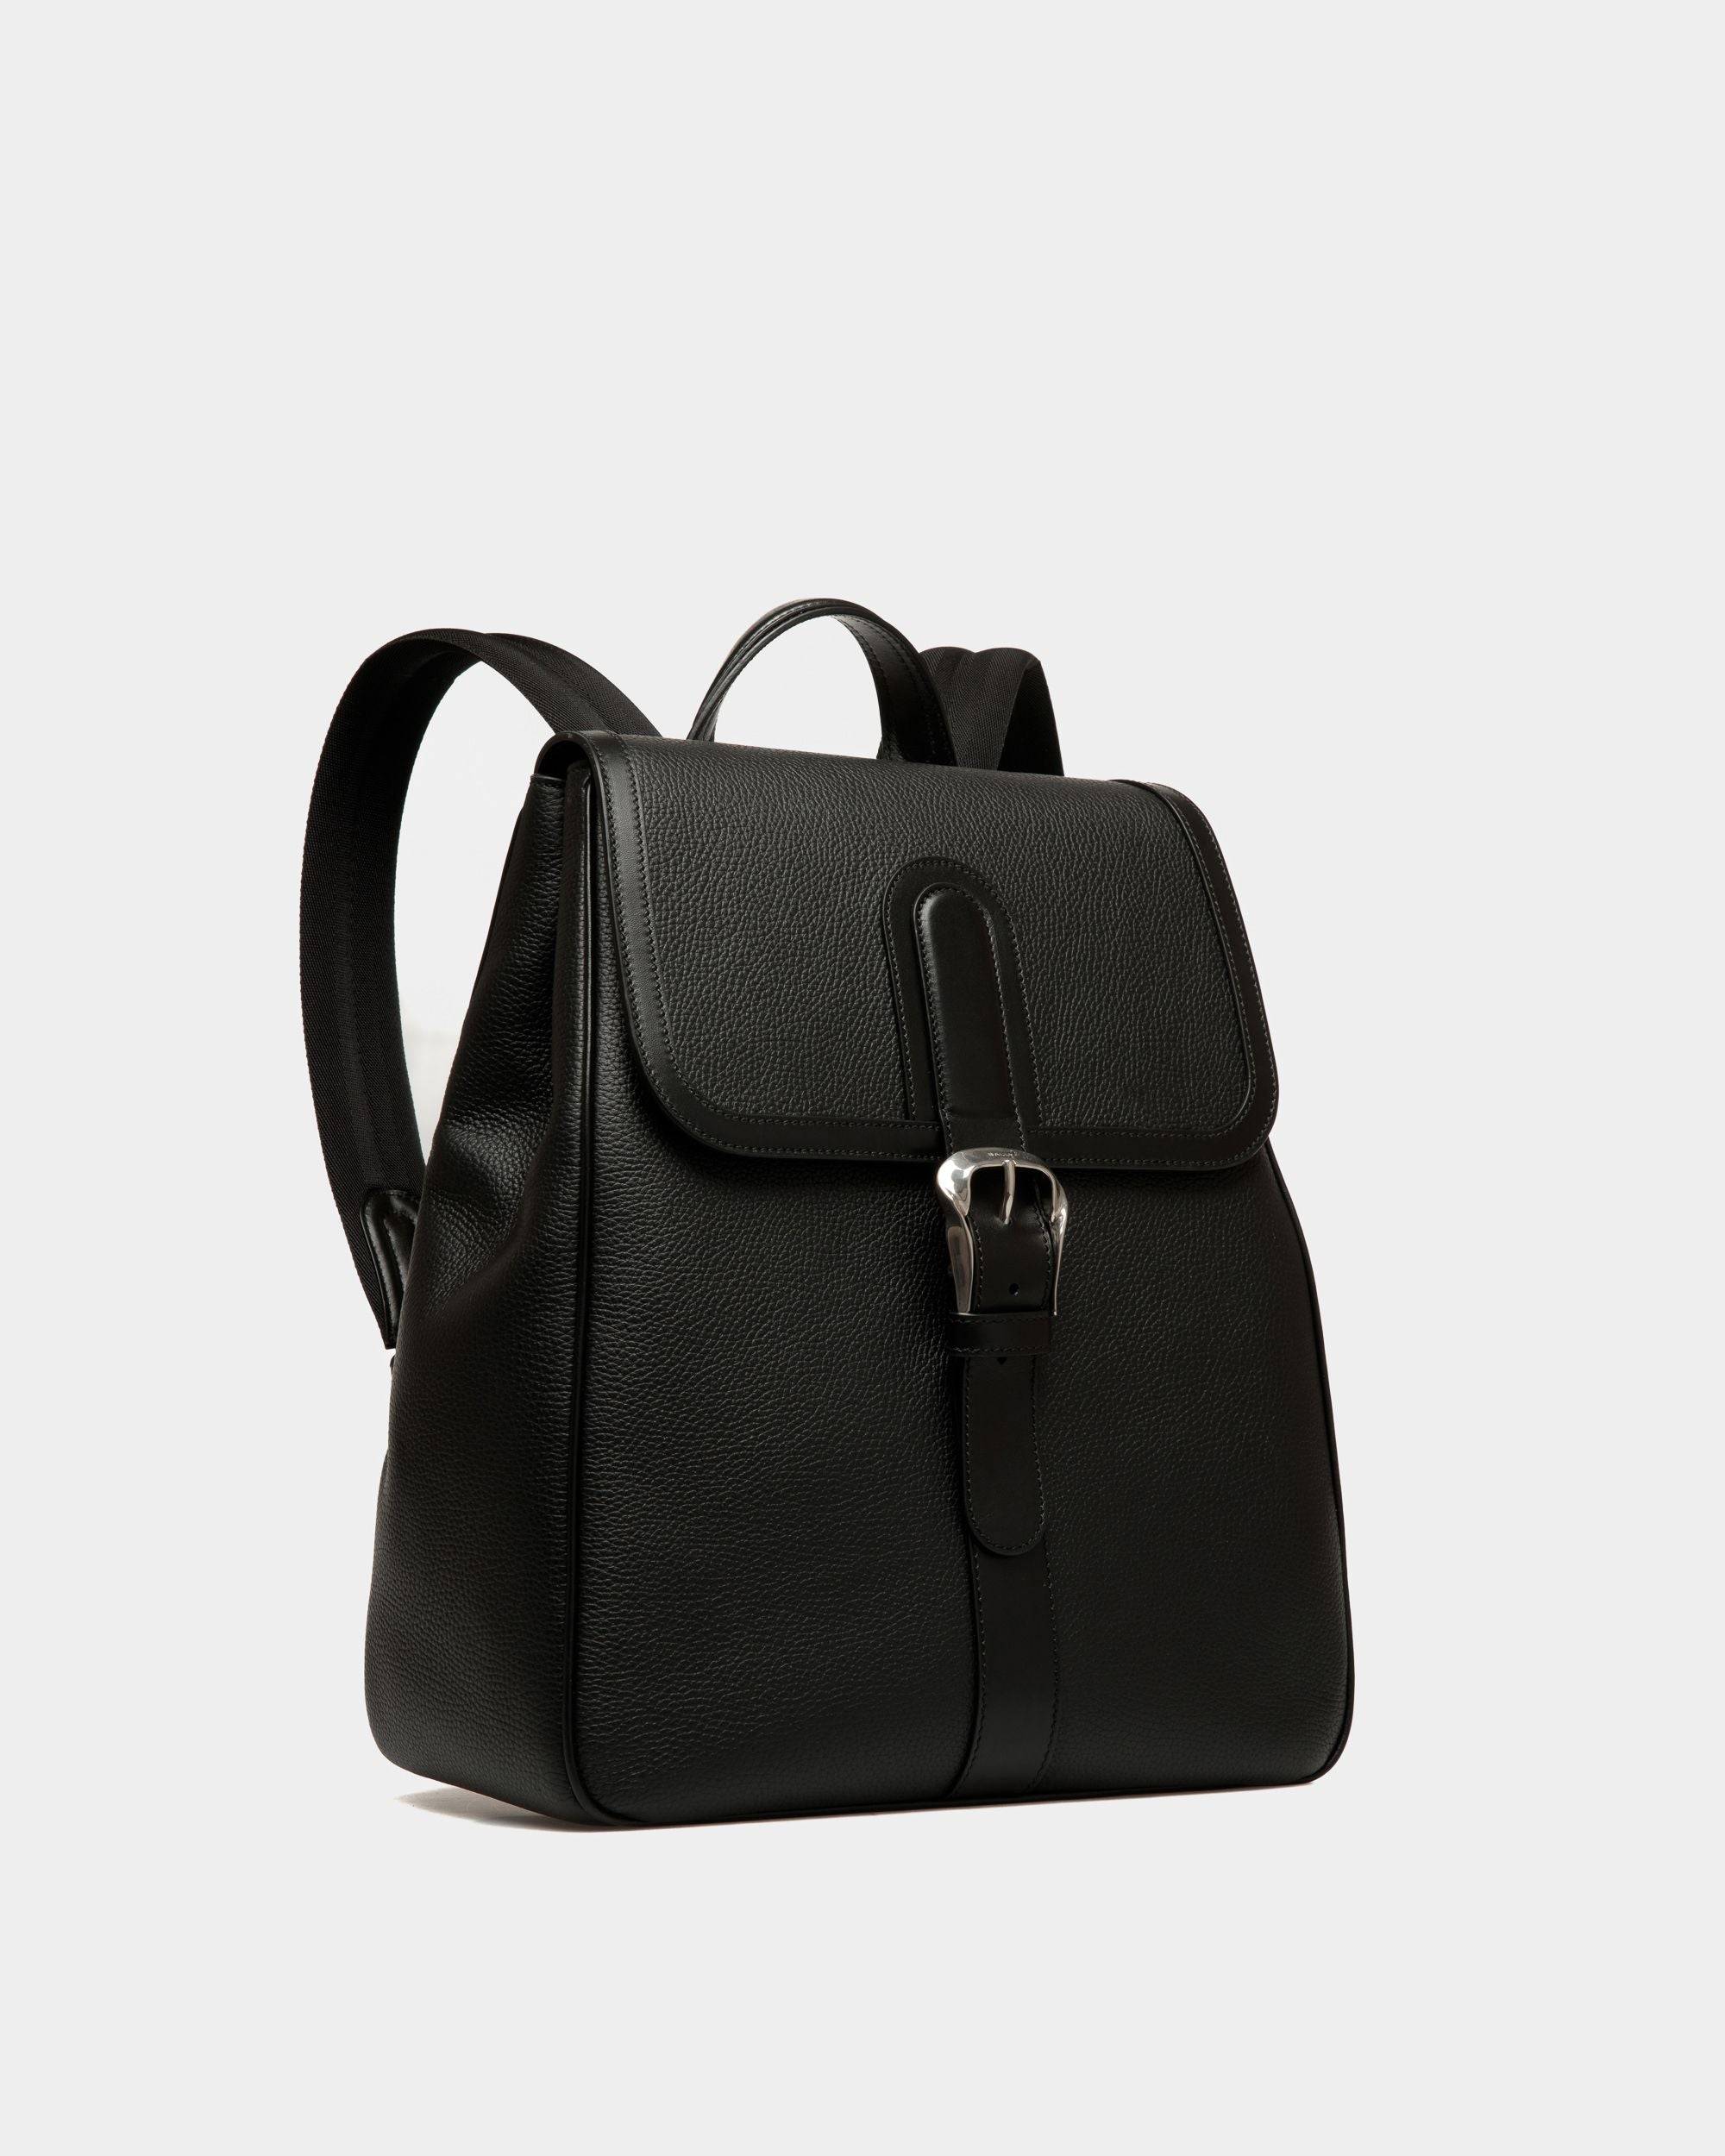 Spin | Men's Backpack in Black Grained Leather | Bally | Still Life 3/4 Front